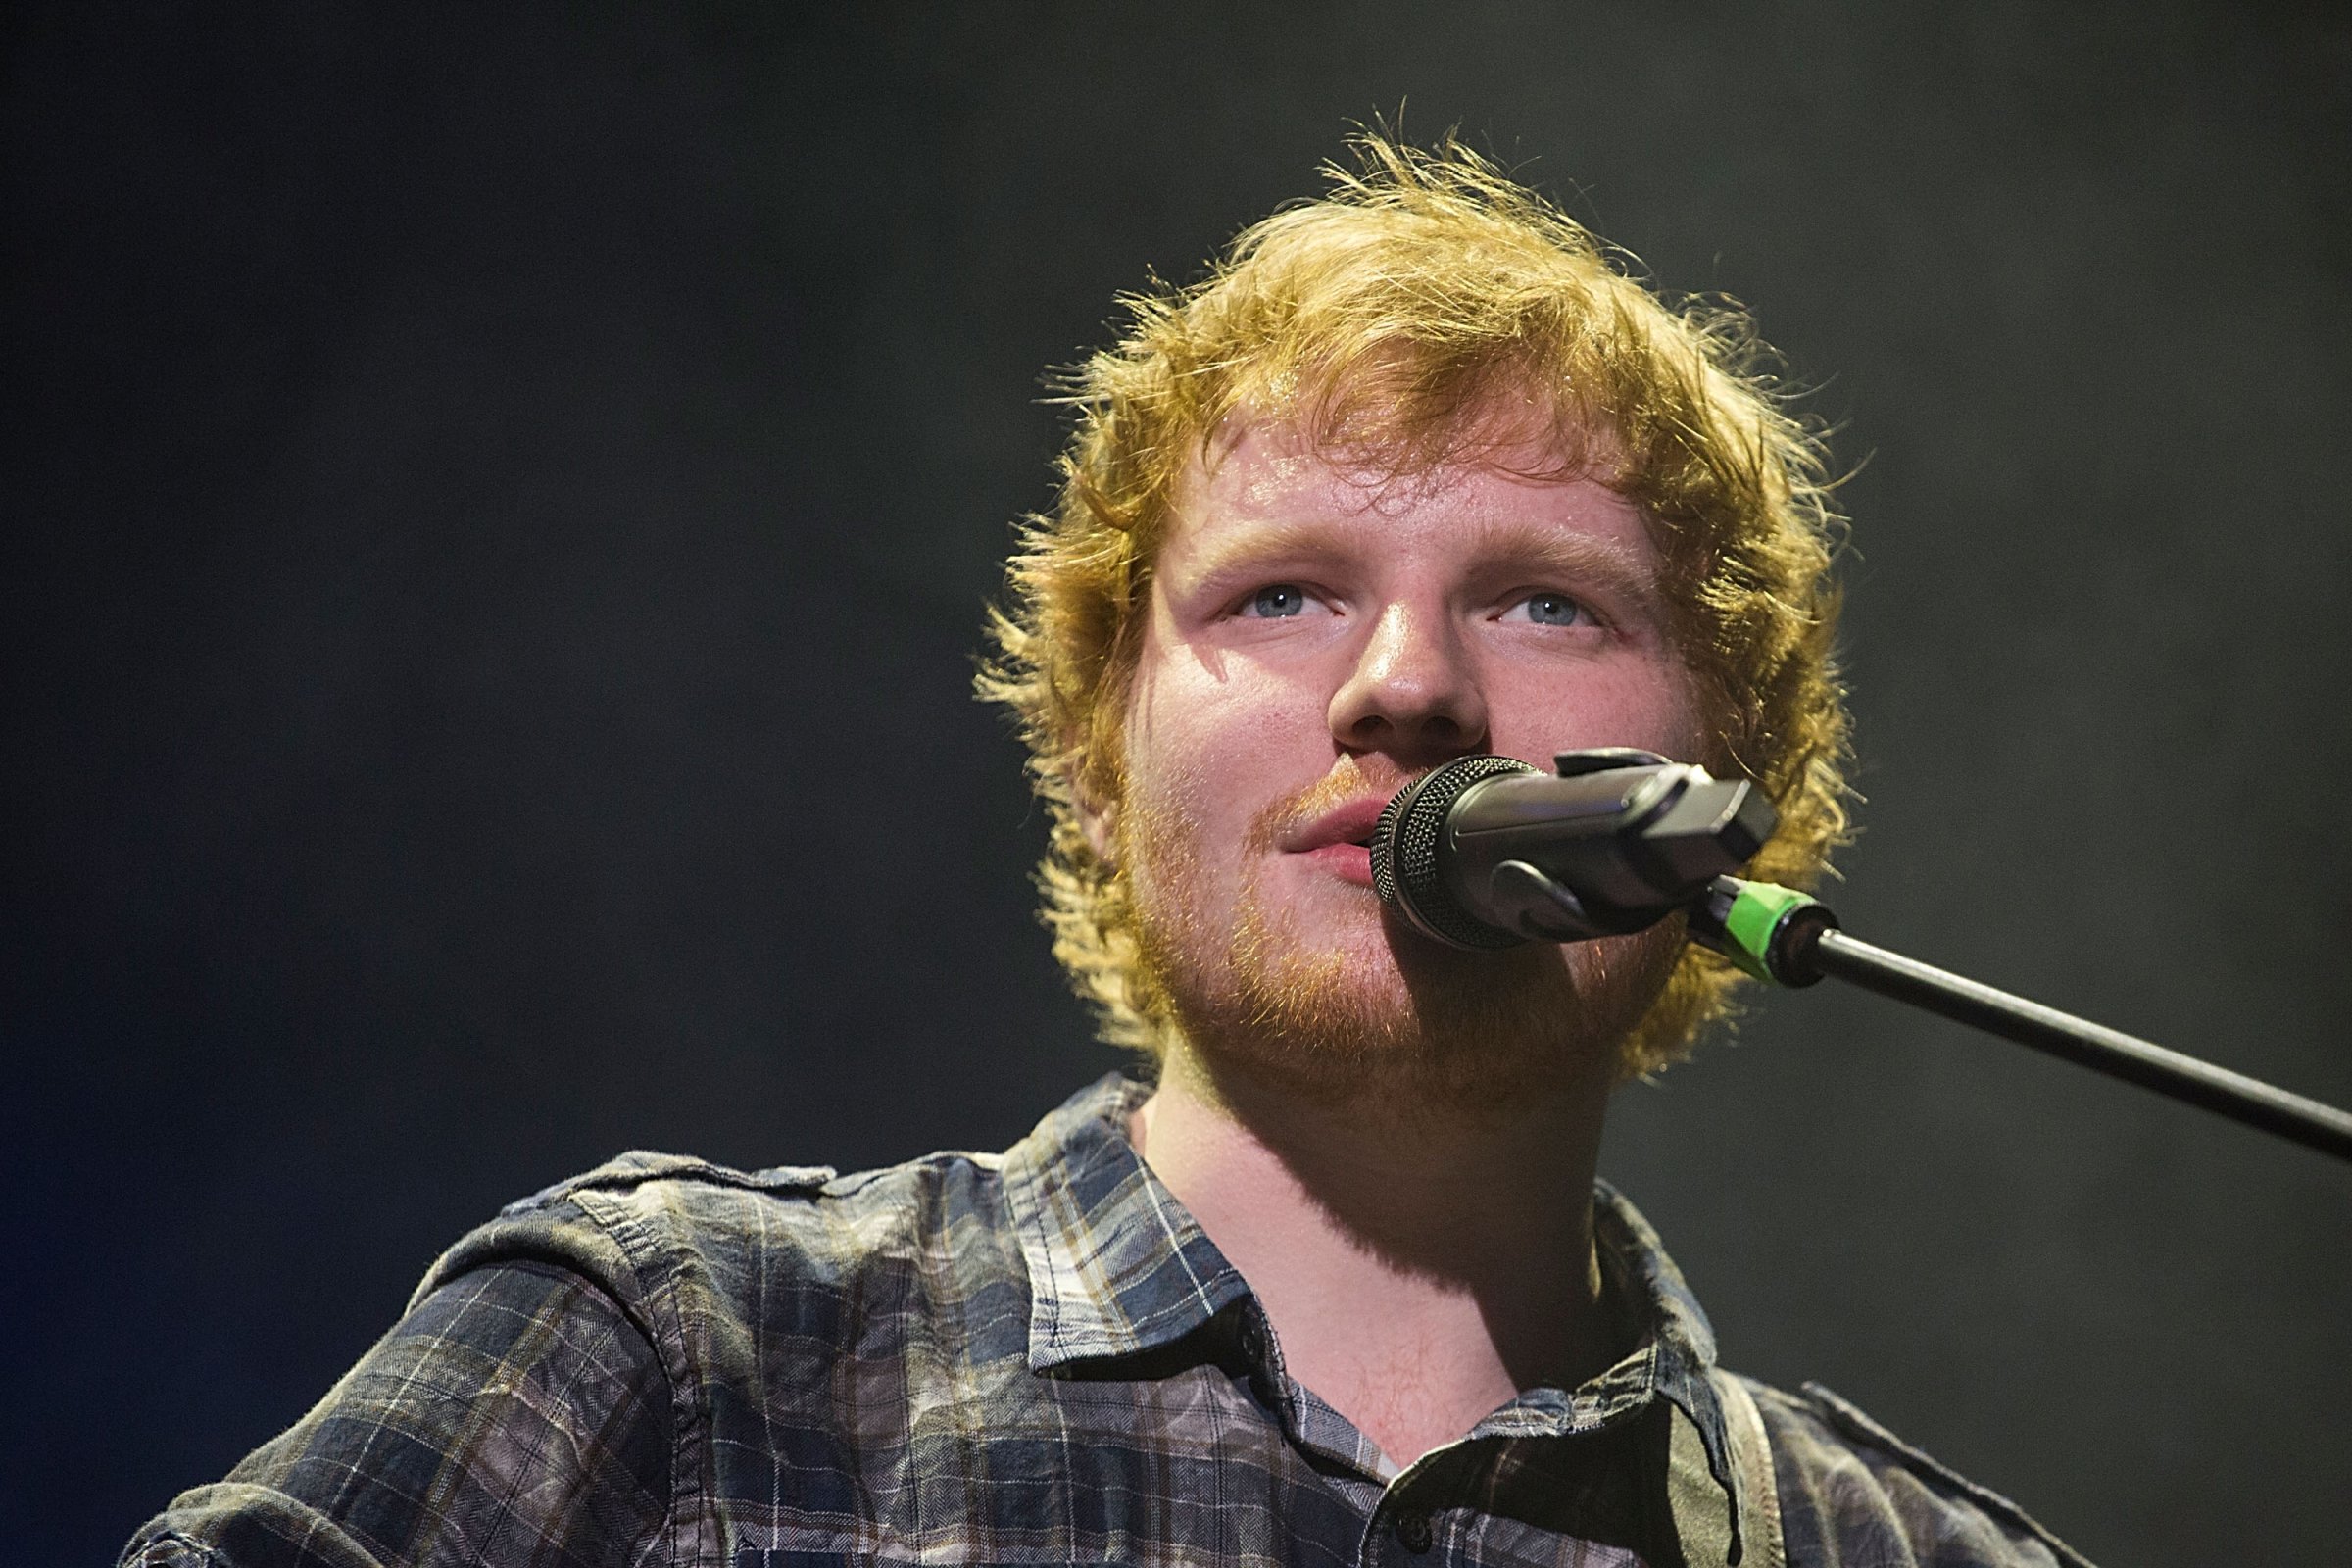 Singer-songwriter Ed Sheeran performs in concert during the opening night of the North American leg of his 'Multiply World Tour' at The Frank Erwin Center on May 6, 2015 in Austin.